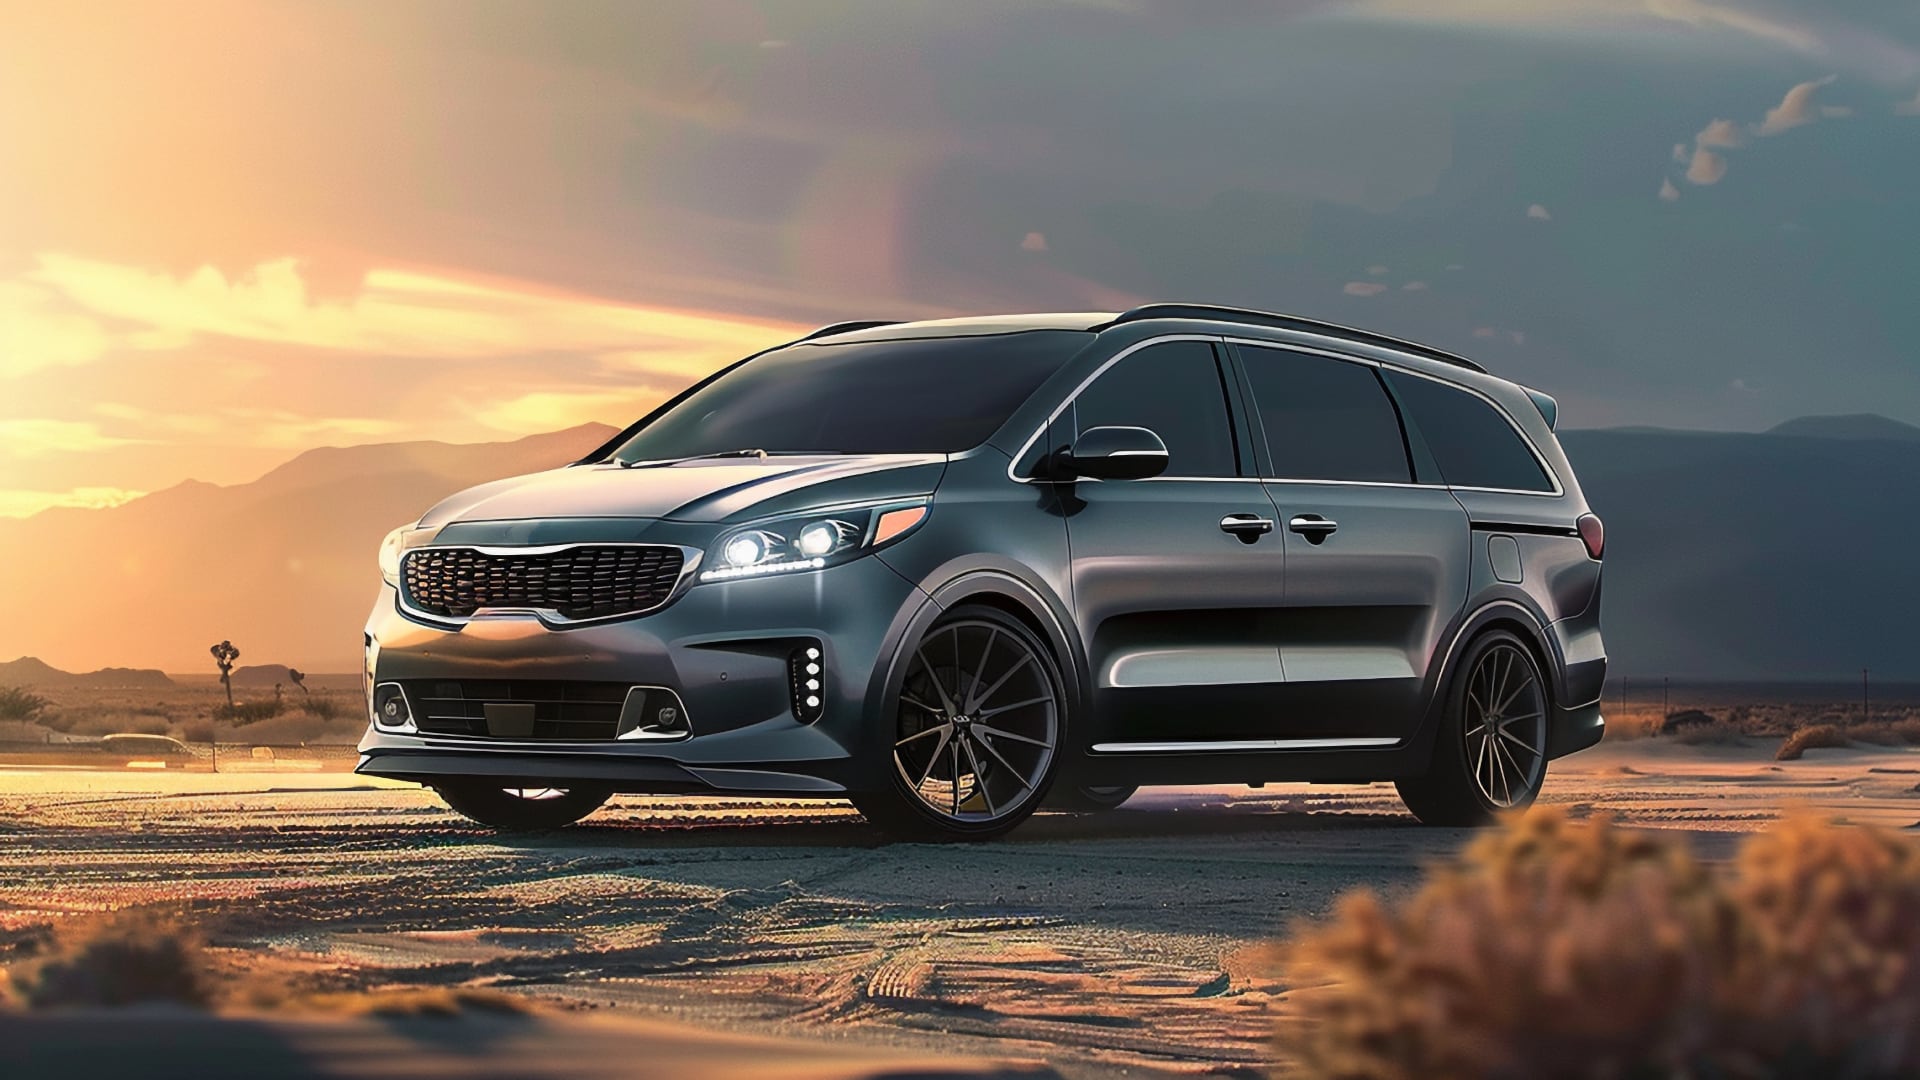 The 2019 Kia Sedona, one to avoid, is parked in the desert.